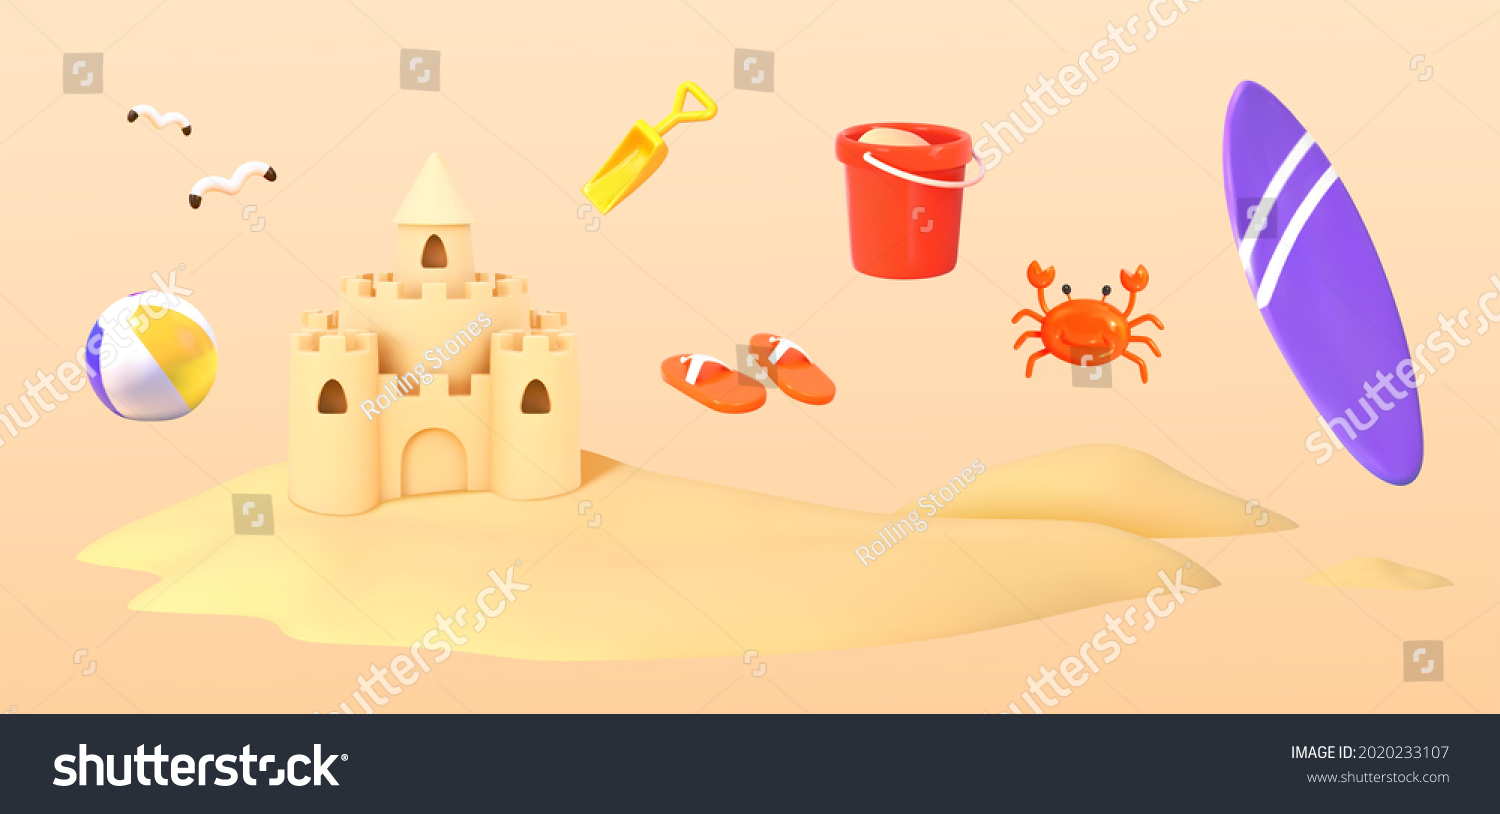 SVG of 3d summer beach objects. Illustration of sand castle, sandcastle tool kit and surfboard, etc. svg